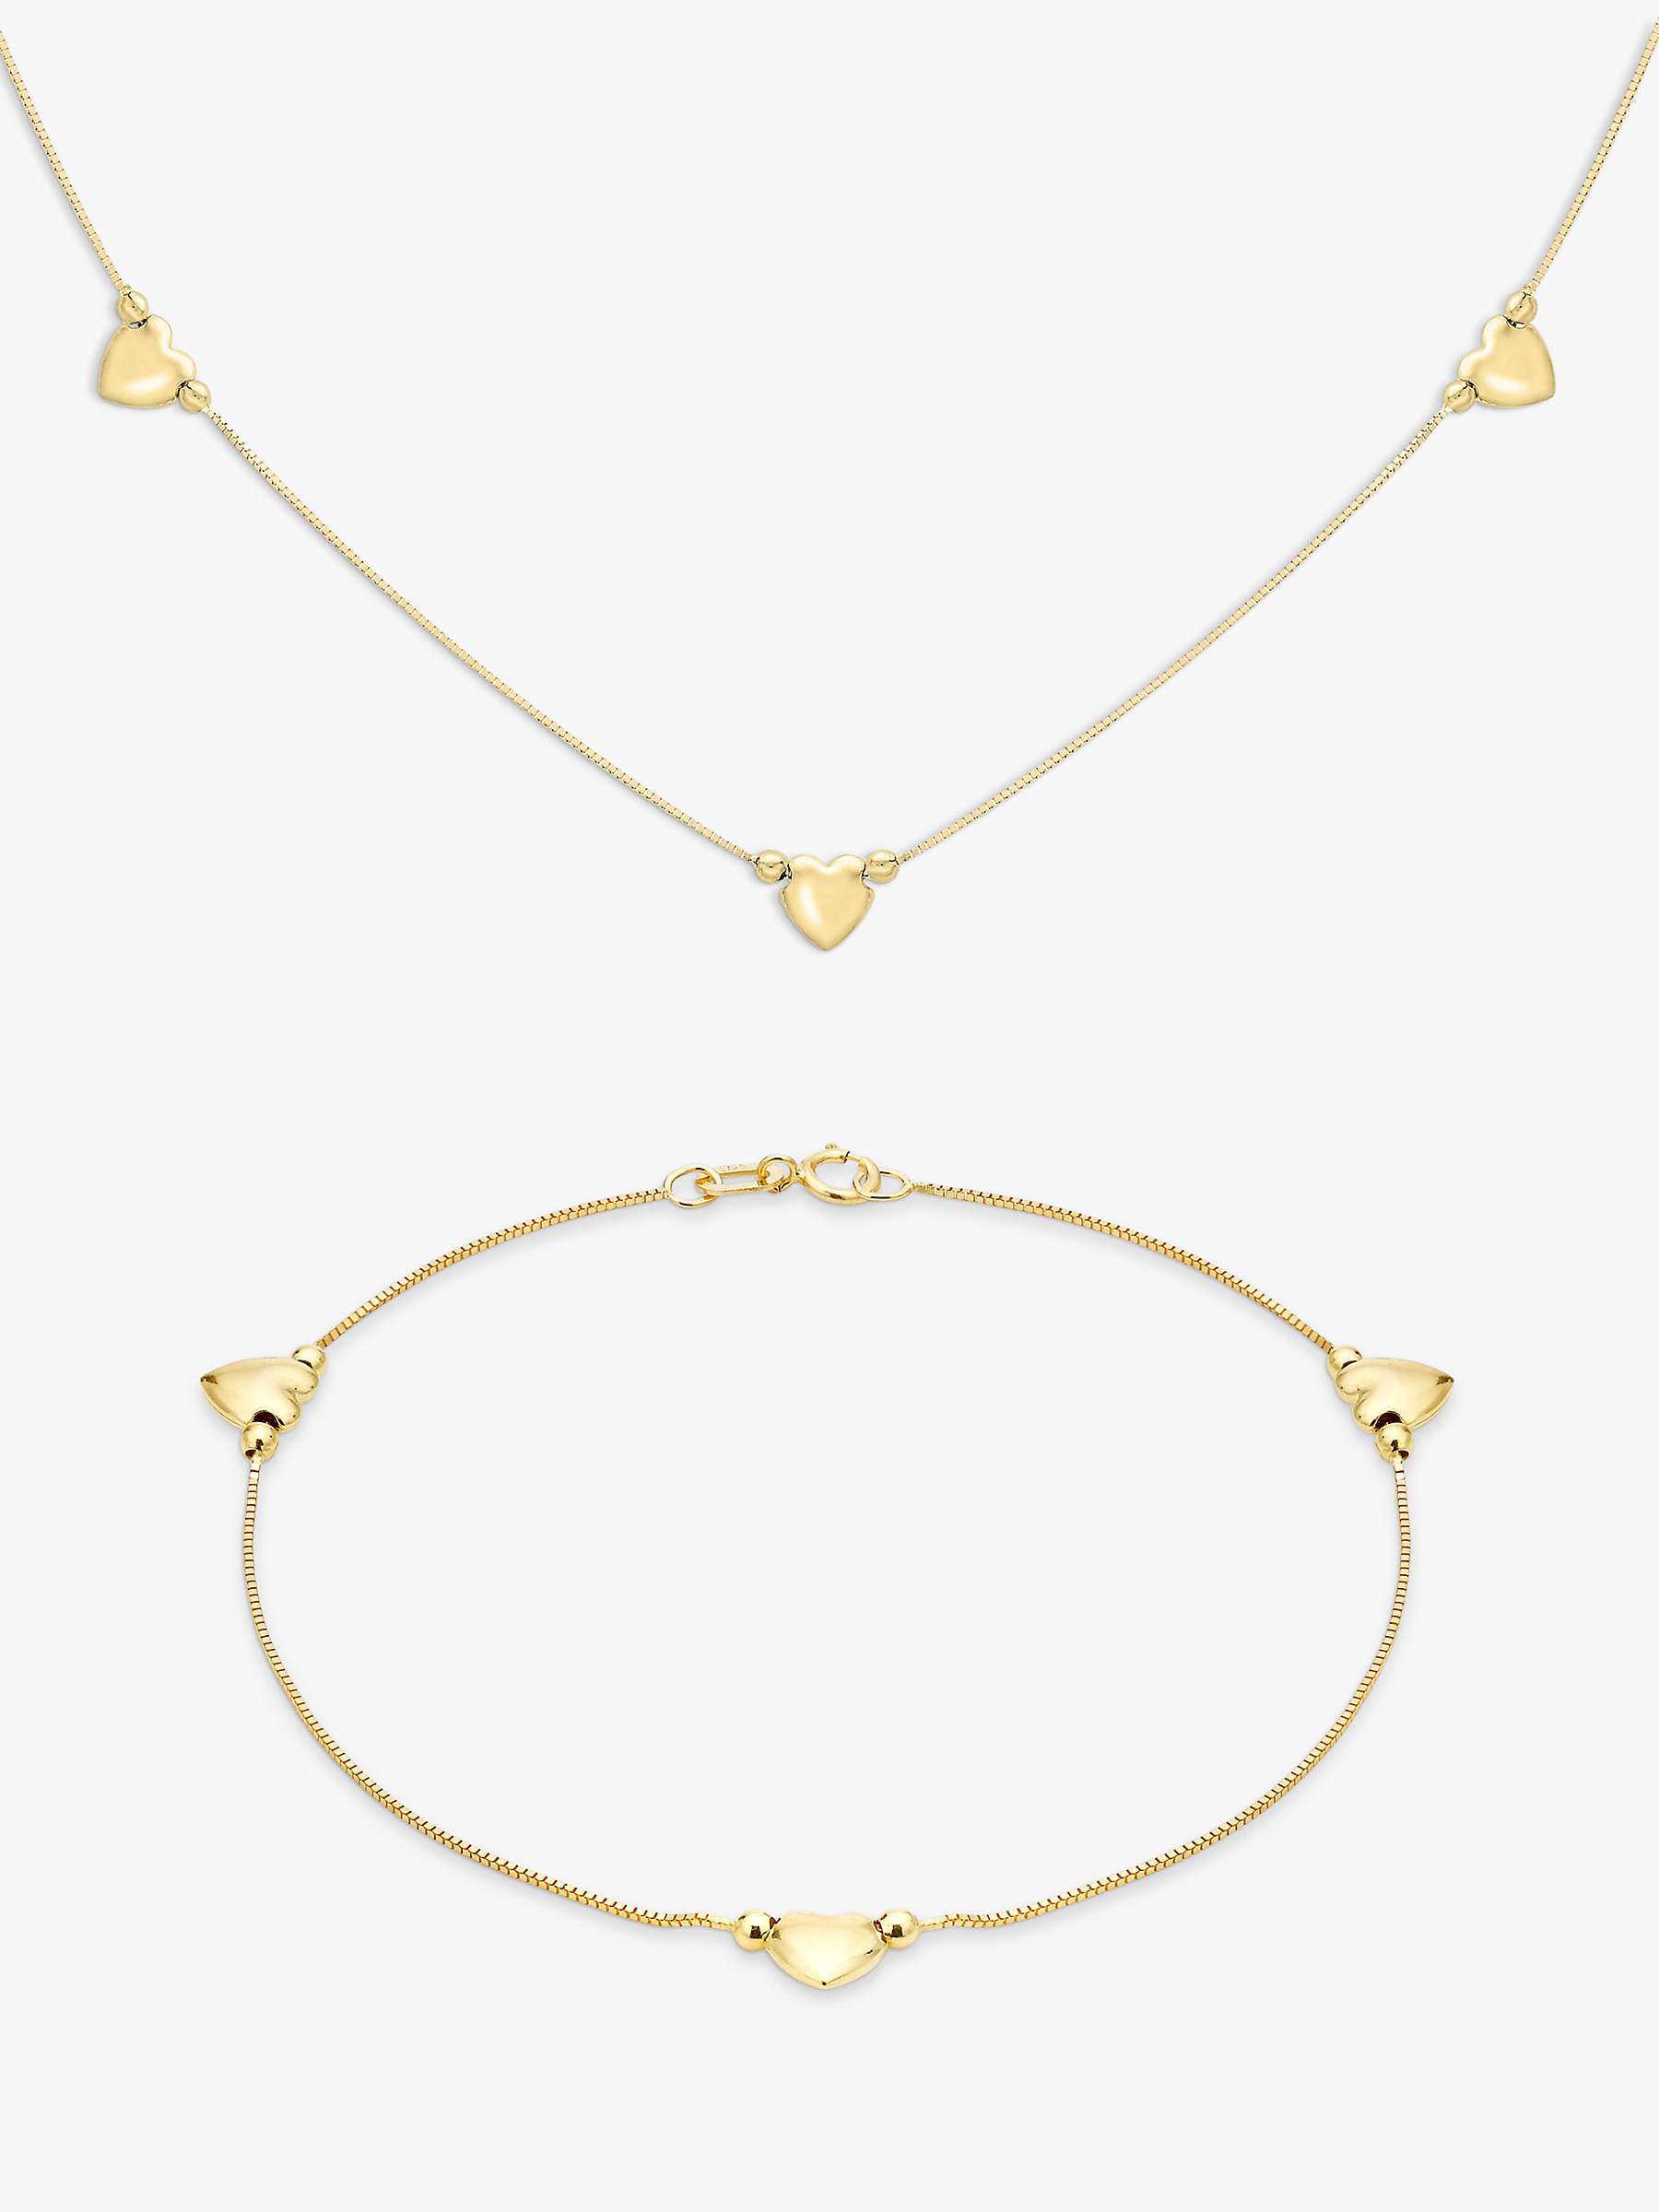 Buy IBB 9ct Yellow Gold Box Chain Heart Necklace and Bracelet Set, Gold Online at johnlewis.com